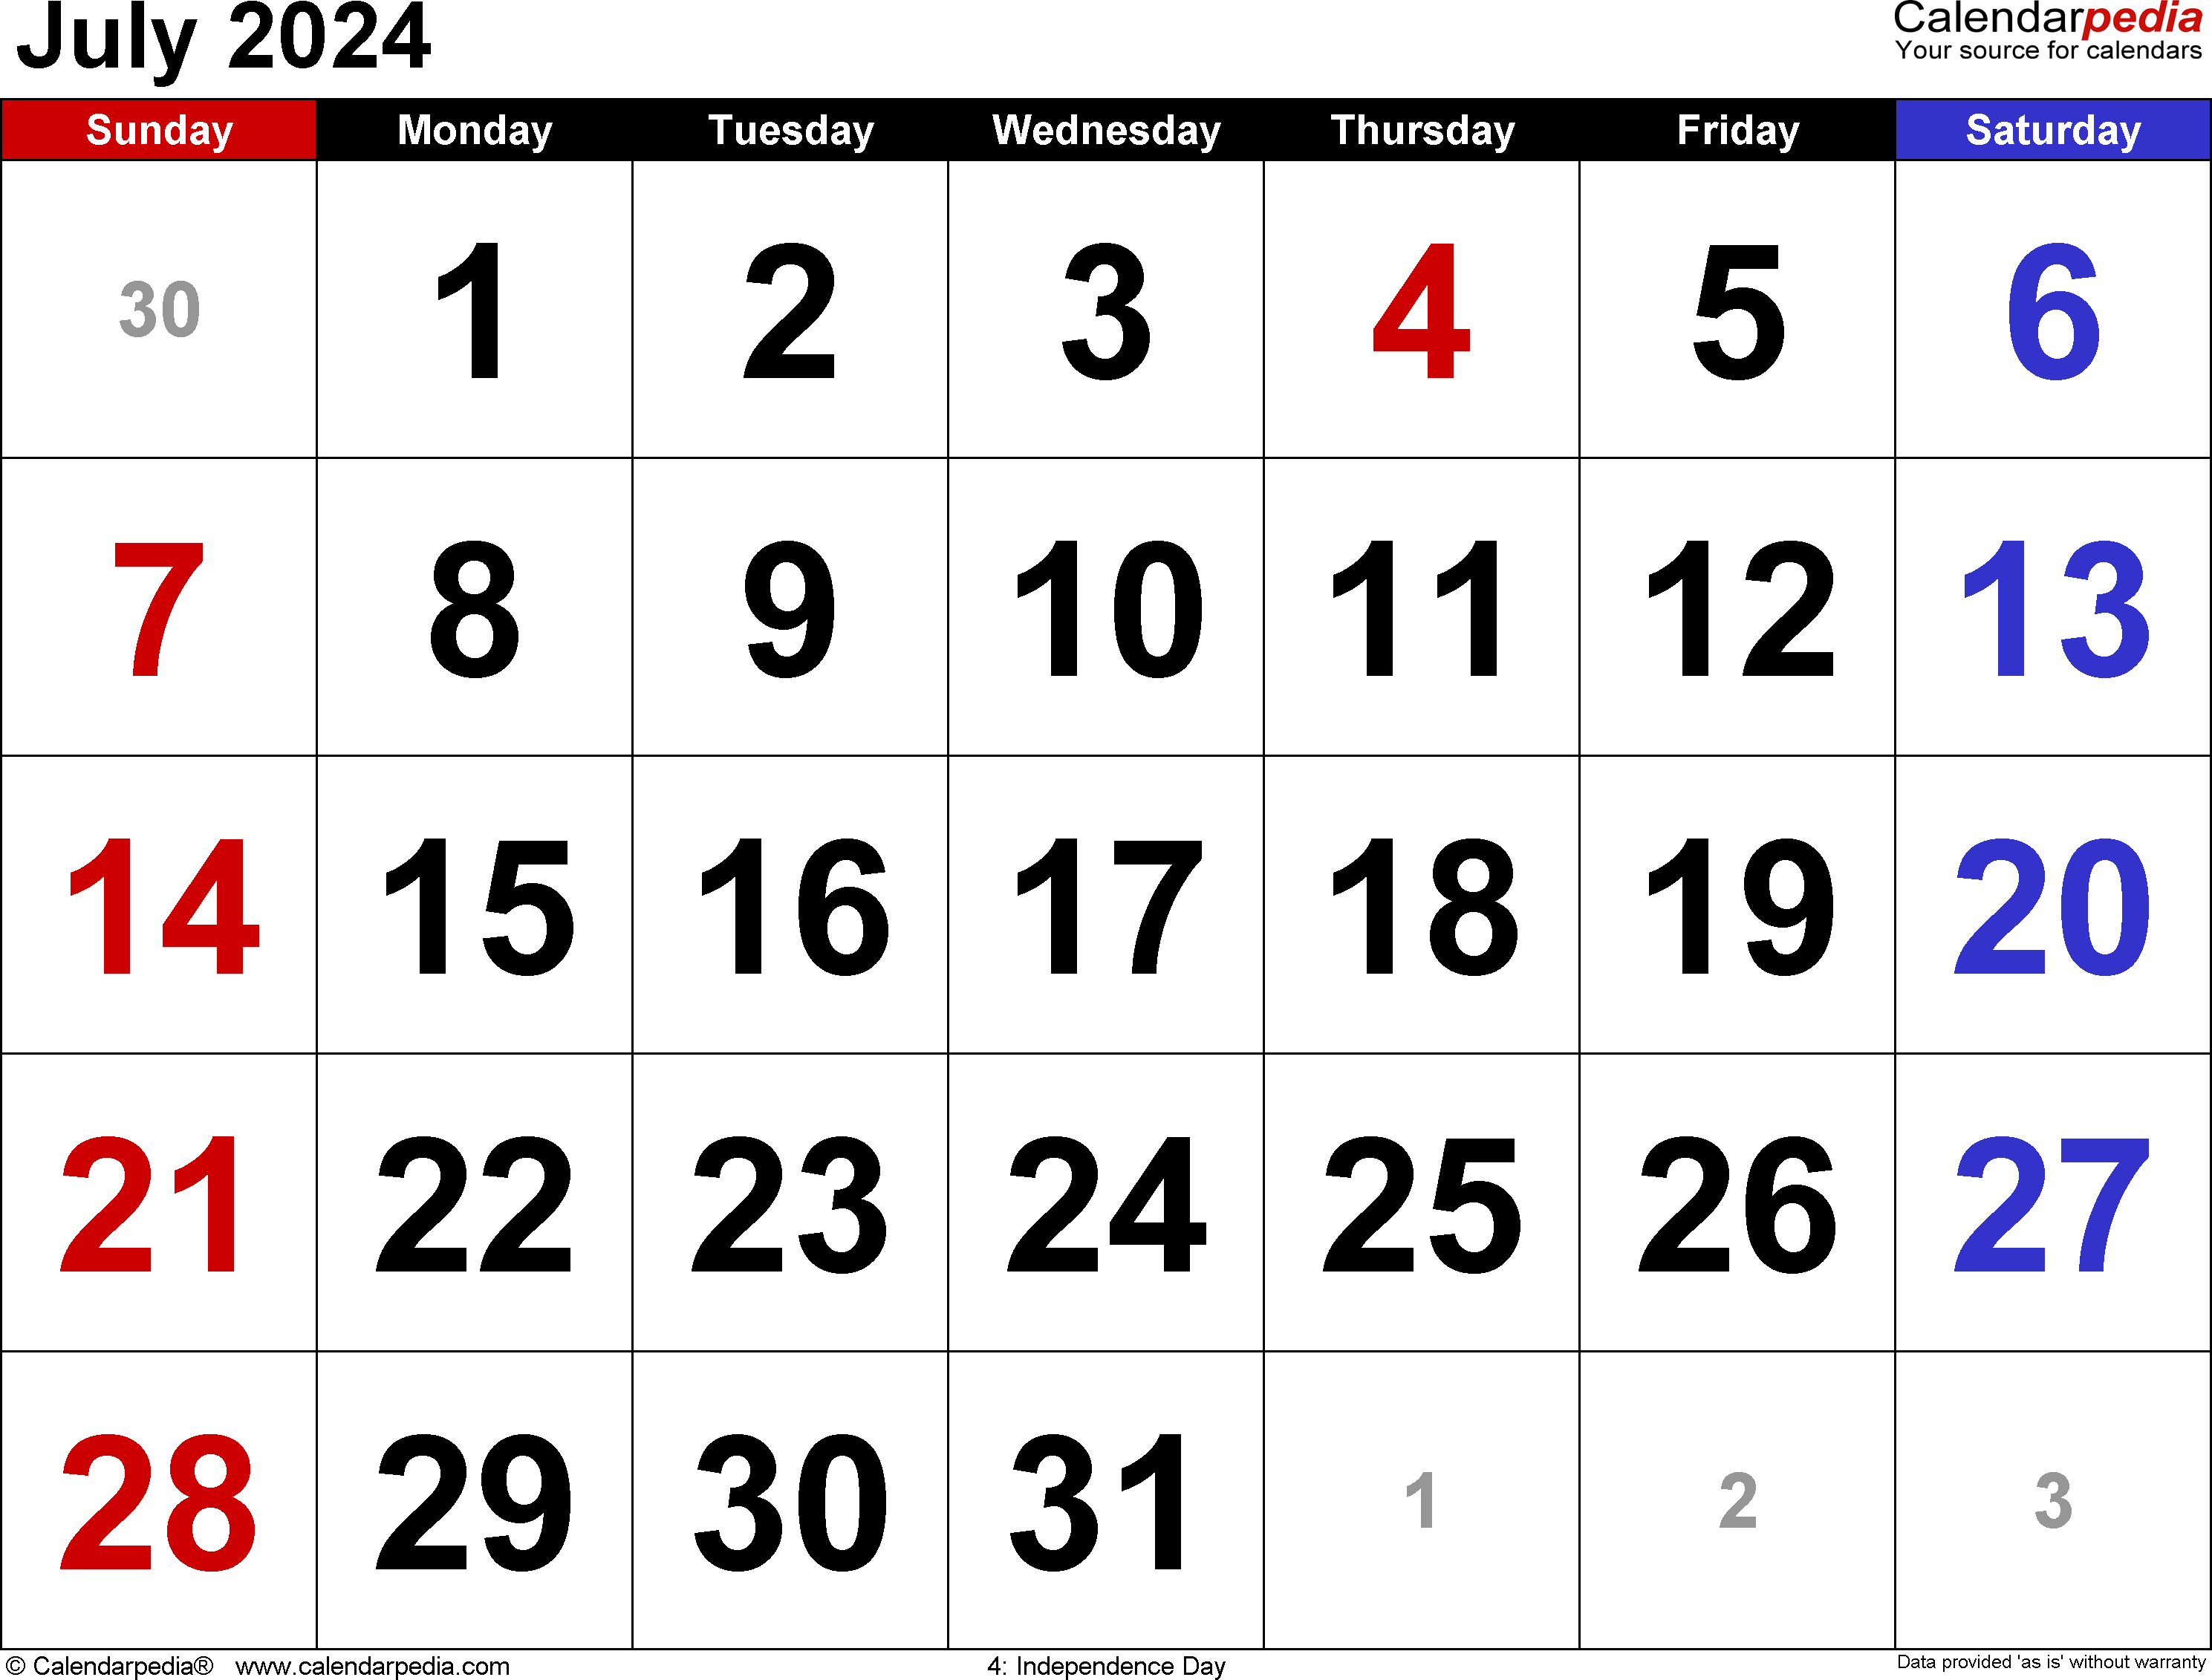 July 2024 Calendar | Templates For Word, Excel And Pdf pertaining to 7 July 2024 Calendar Printable